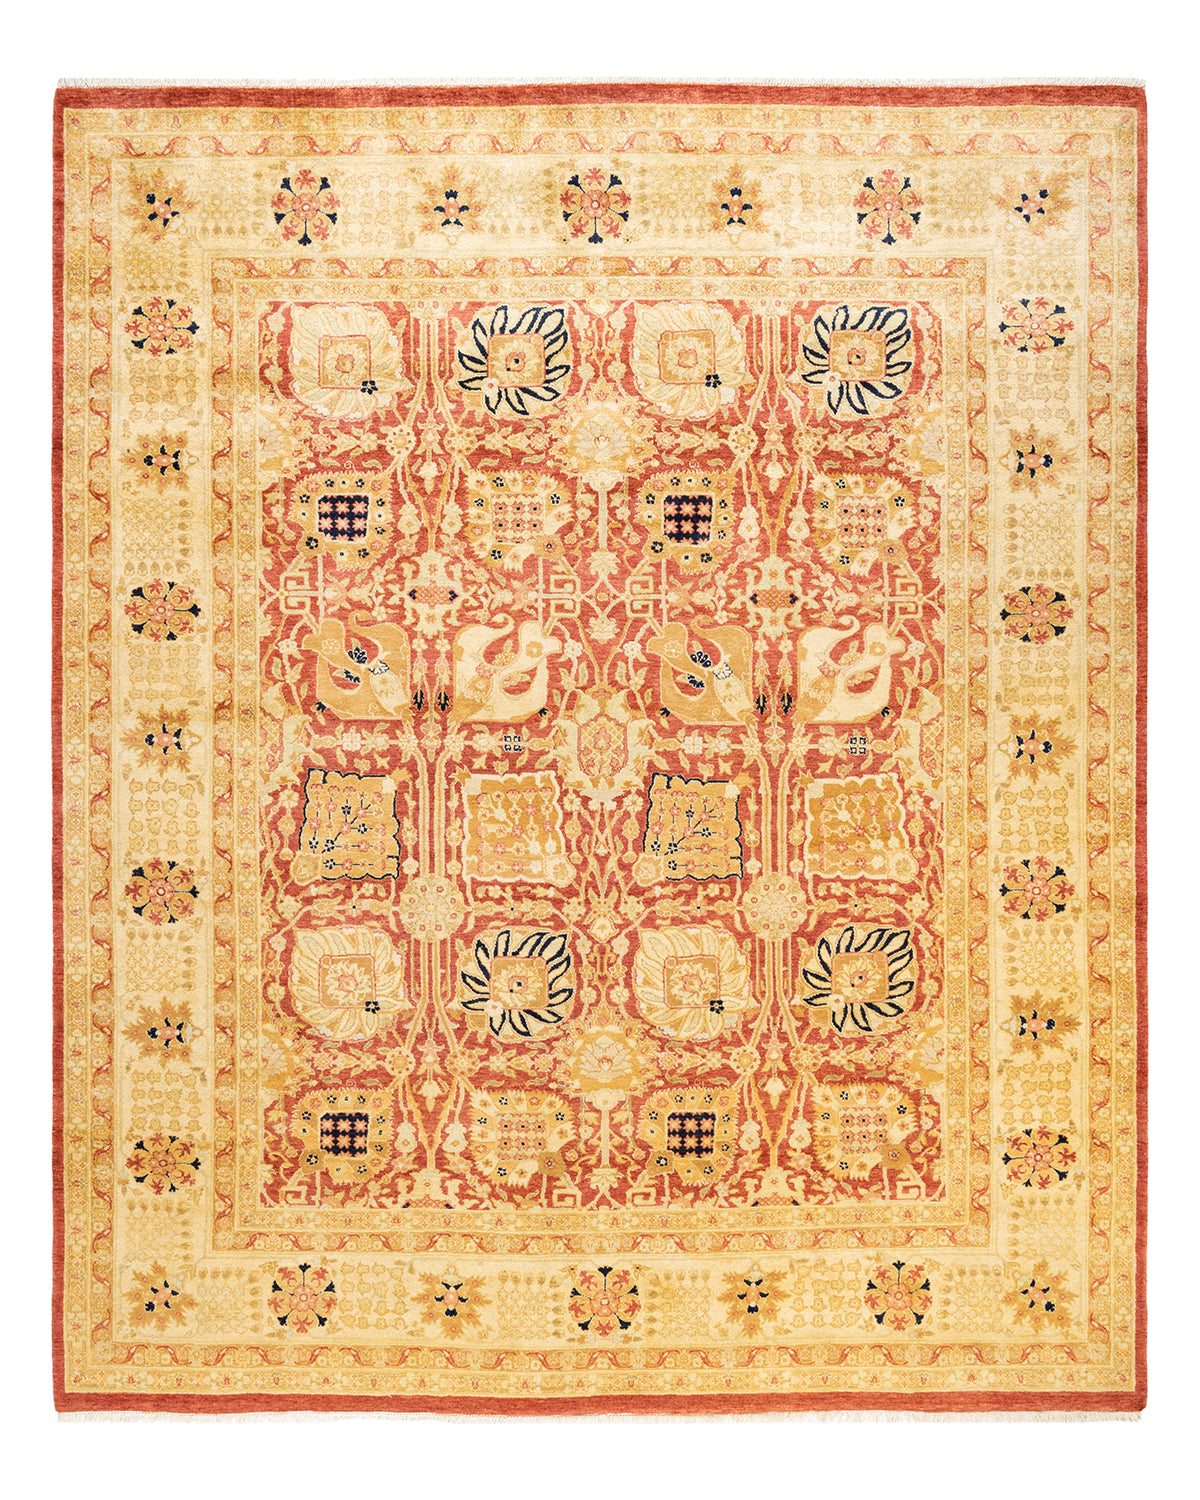 Eclectic, One-of-a-Kind Hand-Knotted Area Rug  - Orange, 8' 2" x 9' 9"